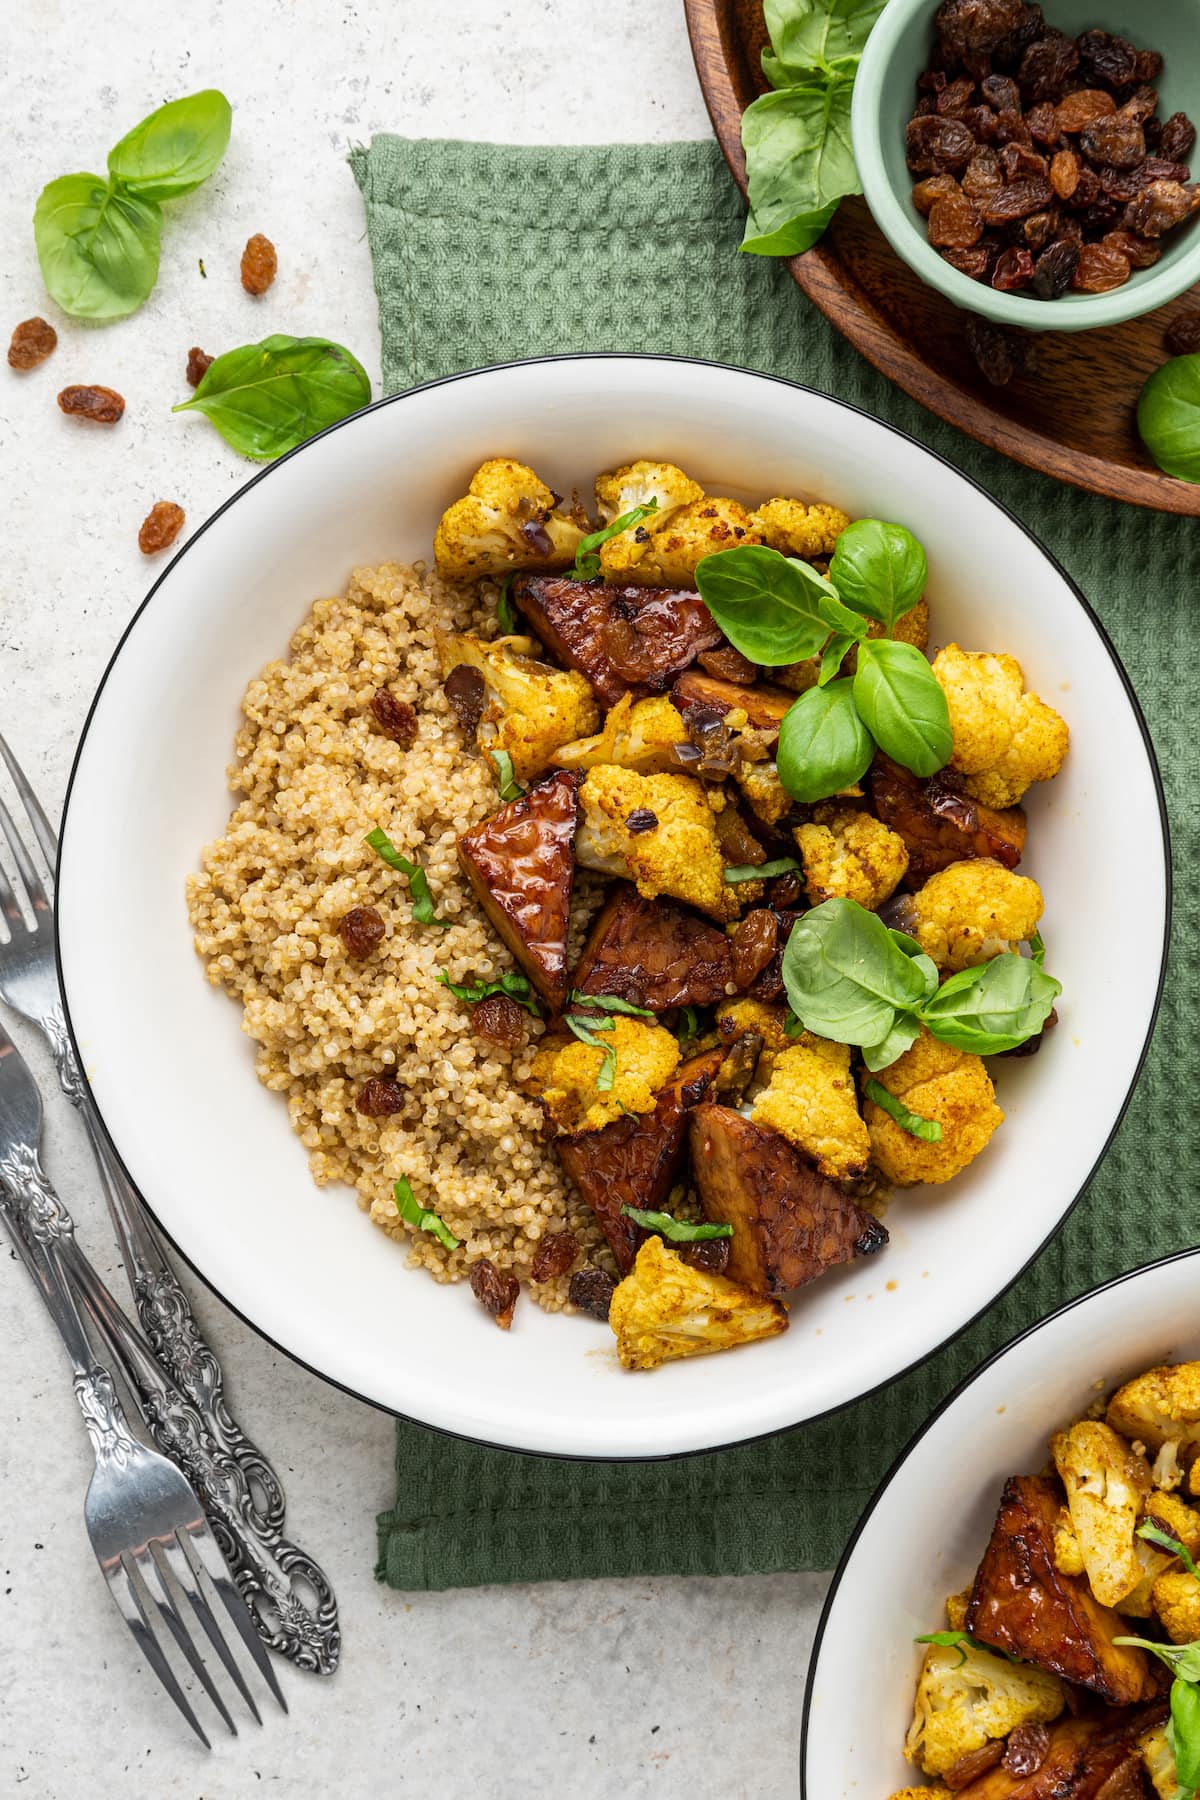 A white bowl containing the curried cauliflower and tempeh over a bed of quinoa and garnished with fresh basil leaves.